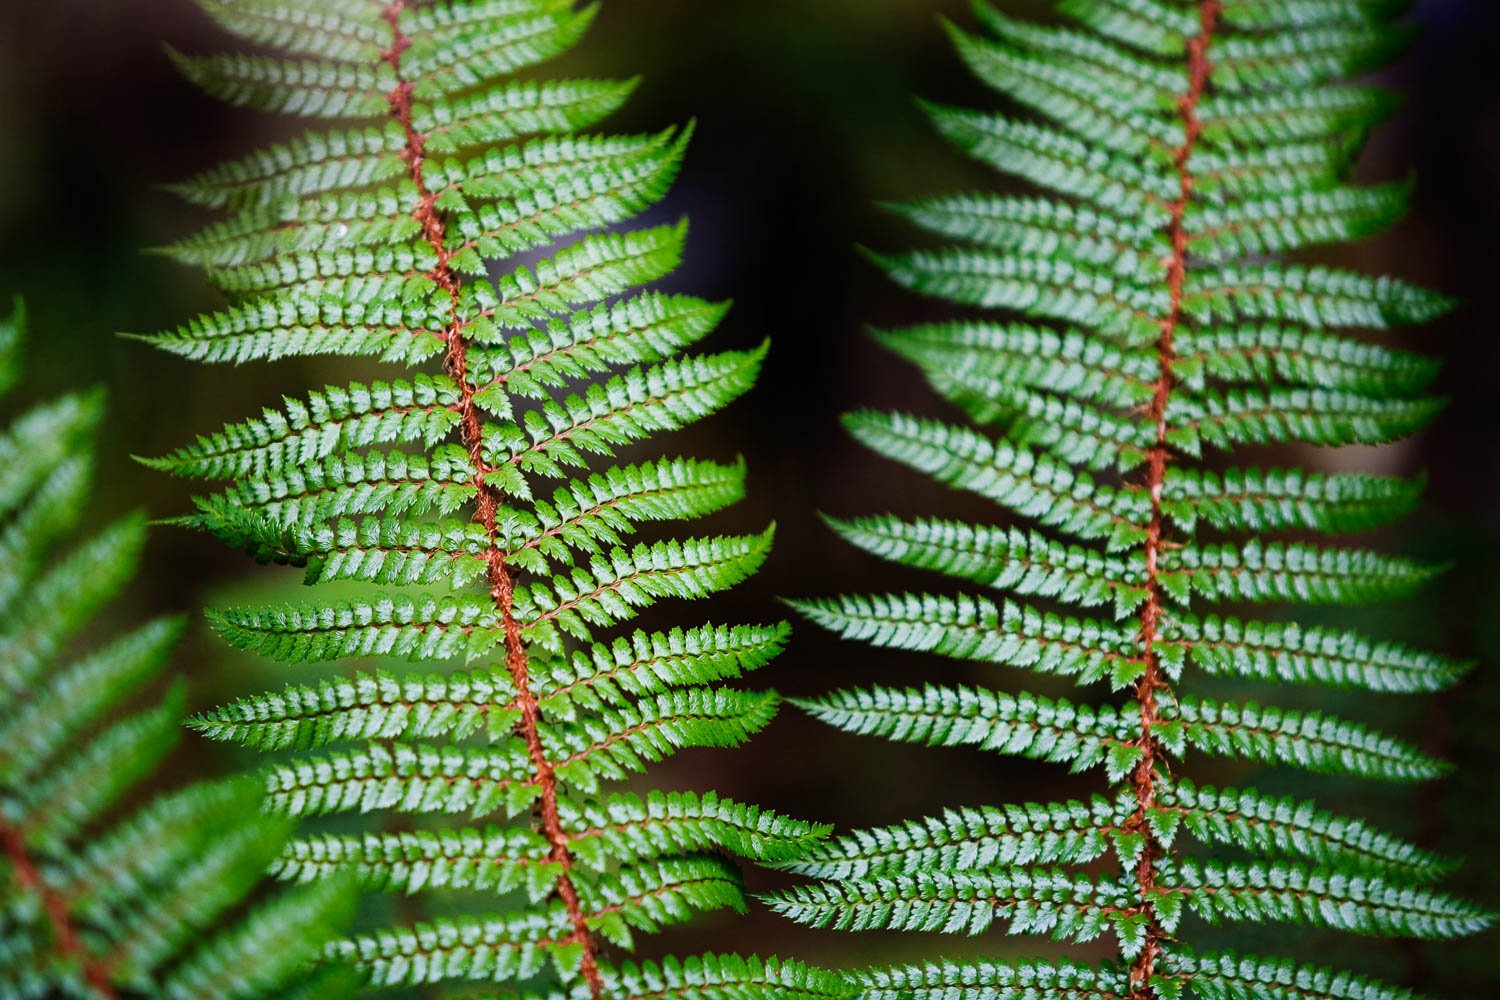 A close-up view of two leaves with many branches, Fern Detail, Routeburn Track - New Zealand